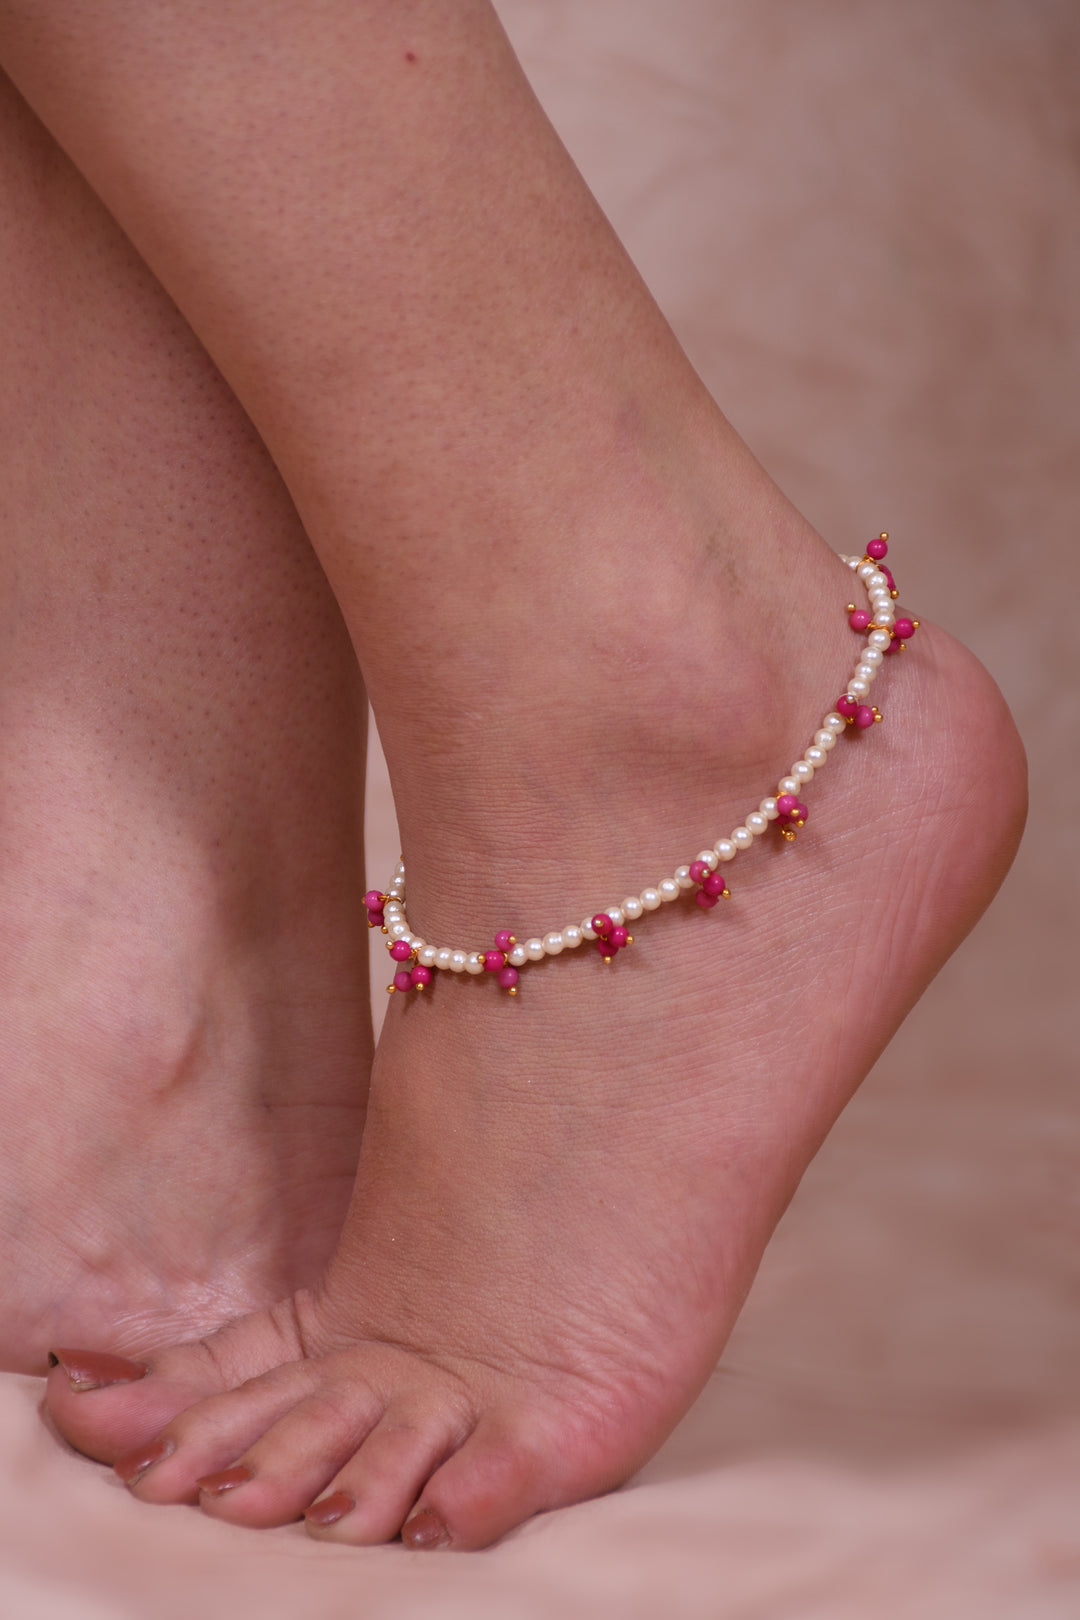 White Pearl Beads Anklet Styled With Pink Round Beads On It